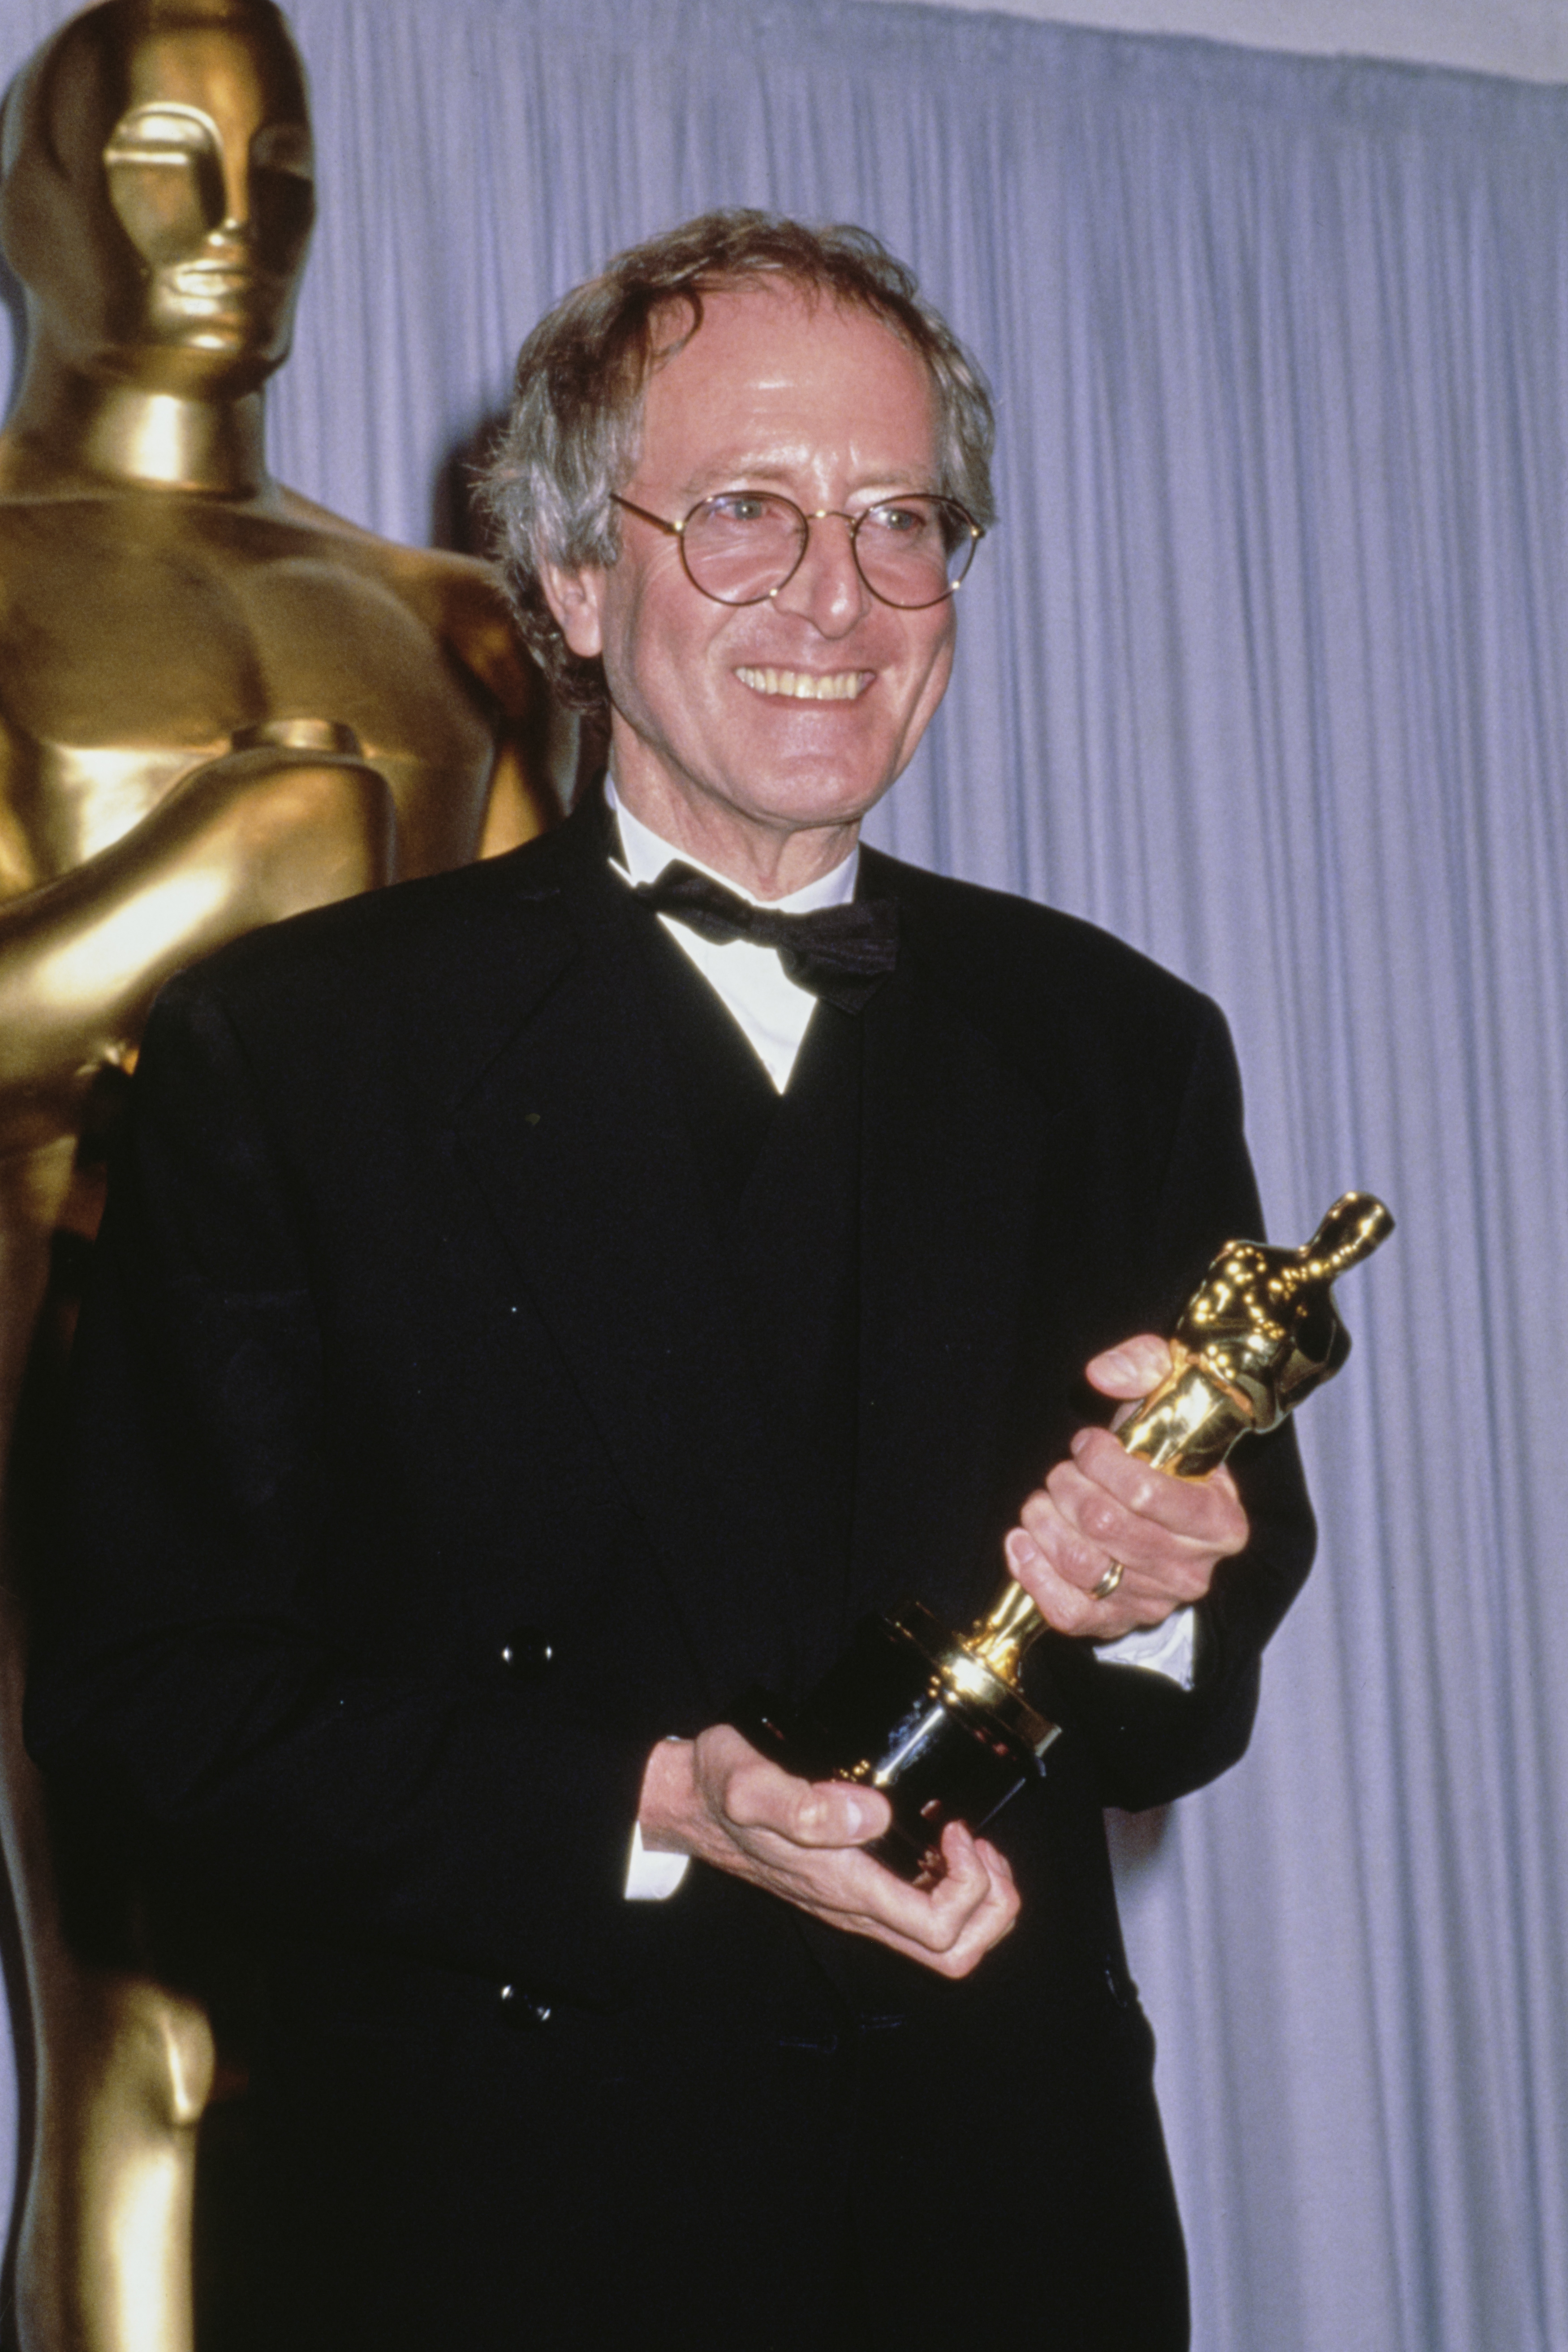 John Barry holds his Best Original Score award for "Dances with Wolves" at the 63rd Annual Academy Awards, at the Shrine Auditorium on March 25, 1991, in Los Angeles, California. | Source: Getty Images